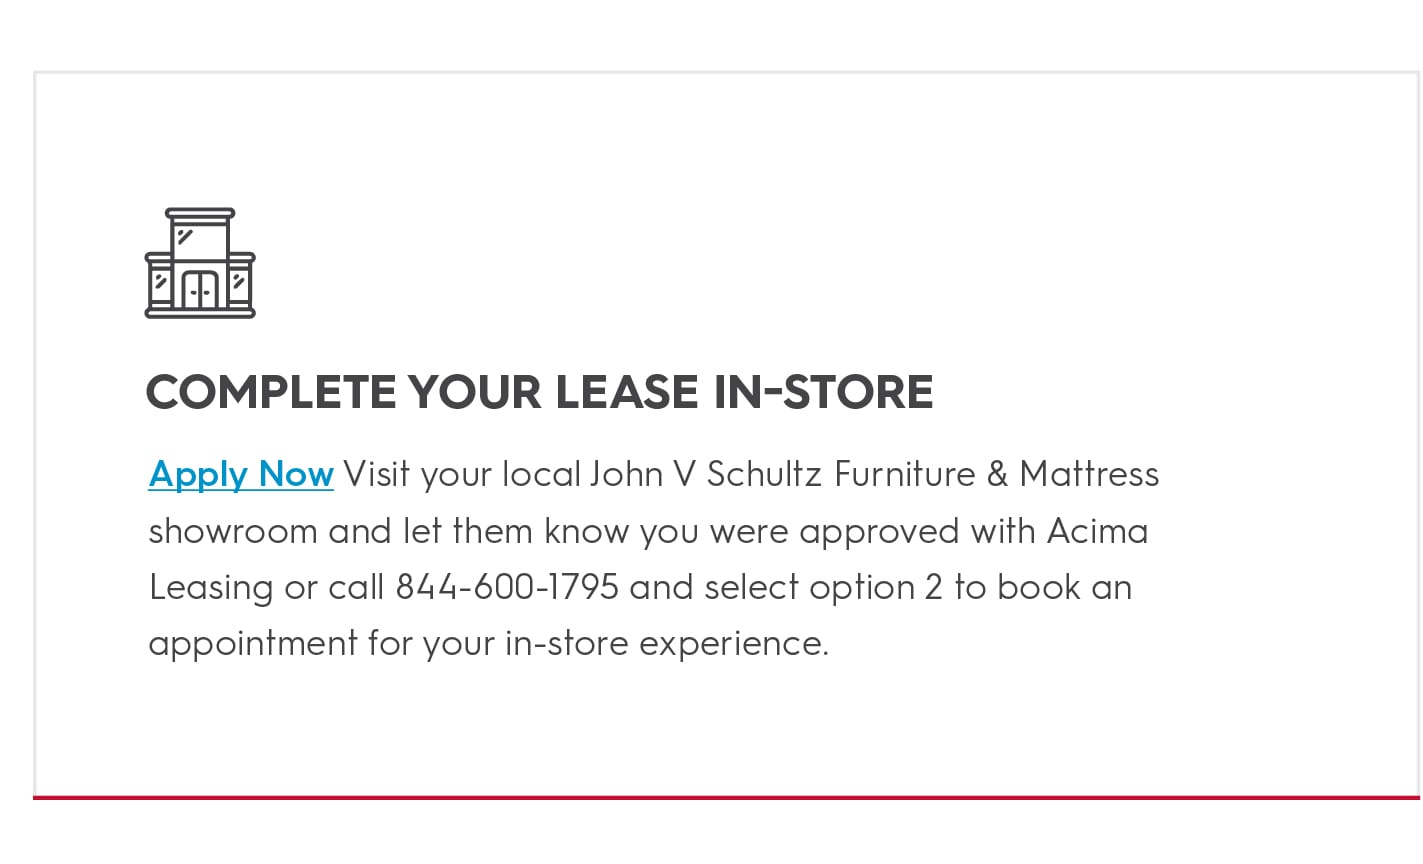 Learn more about Acima Leasing options.